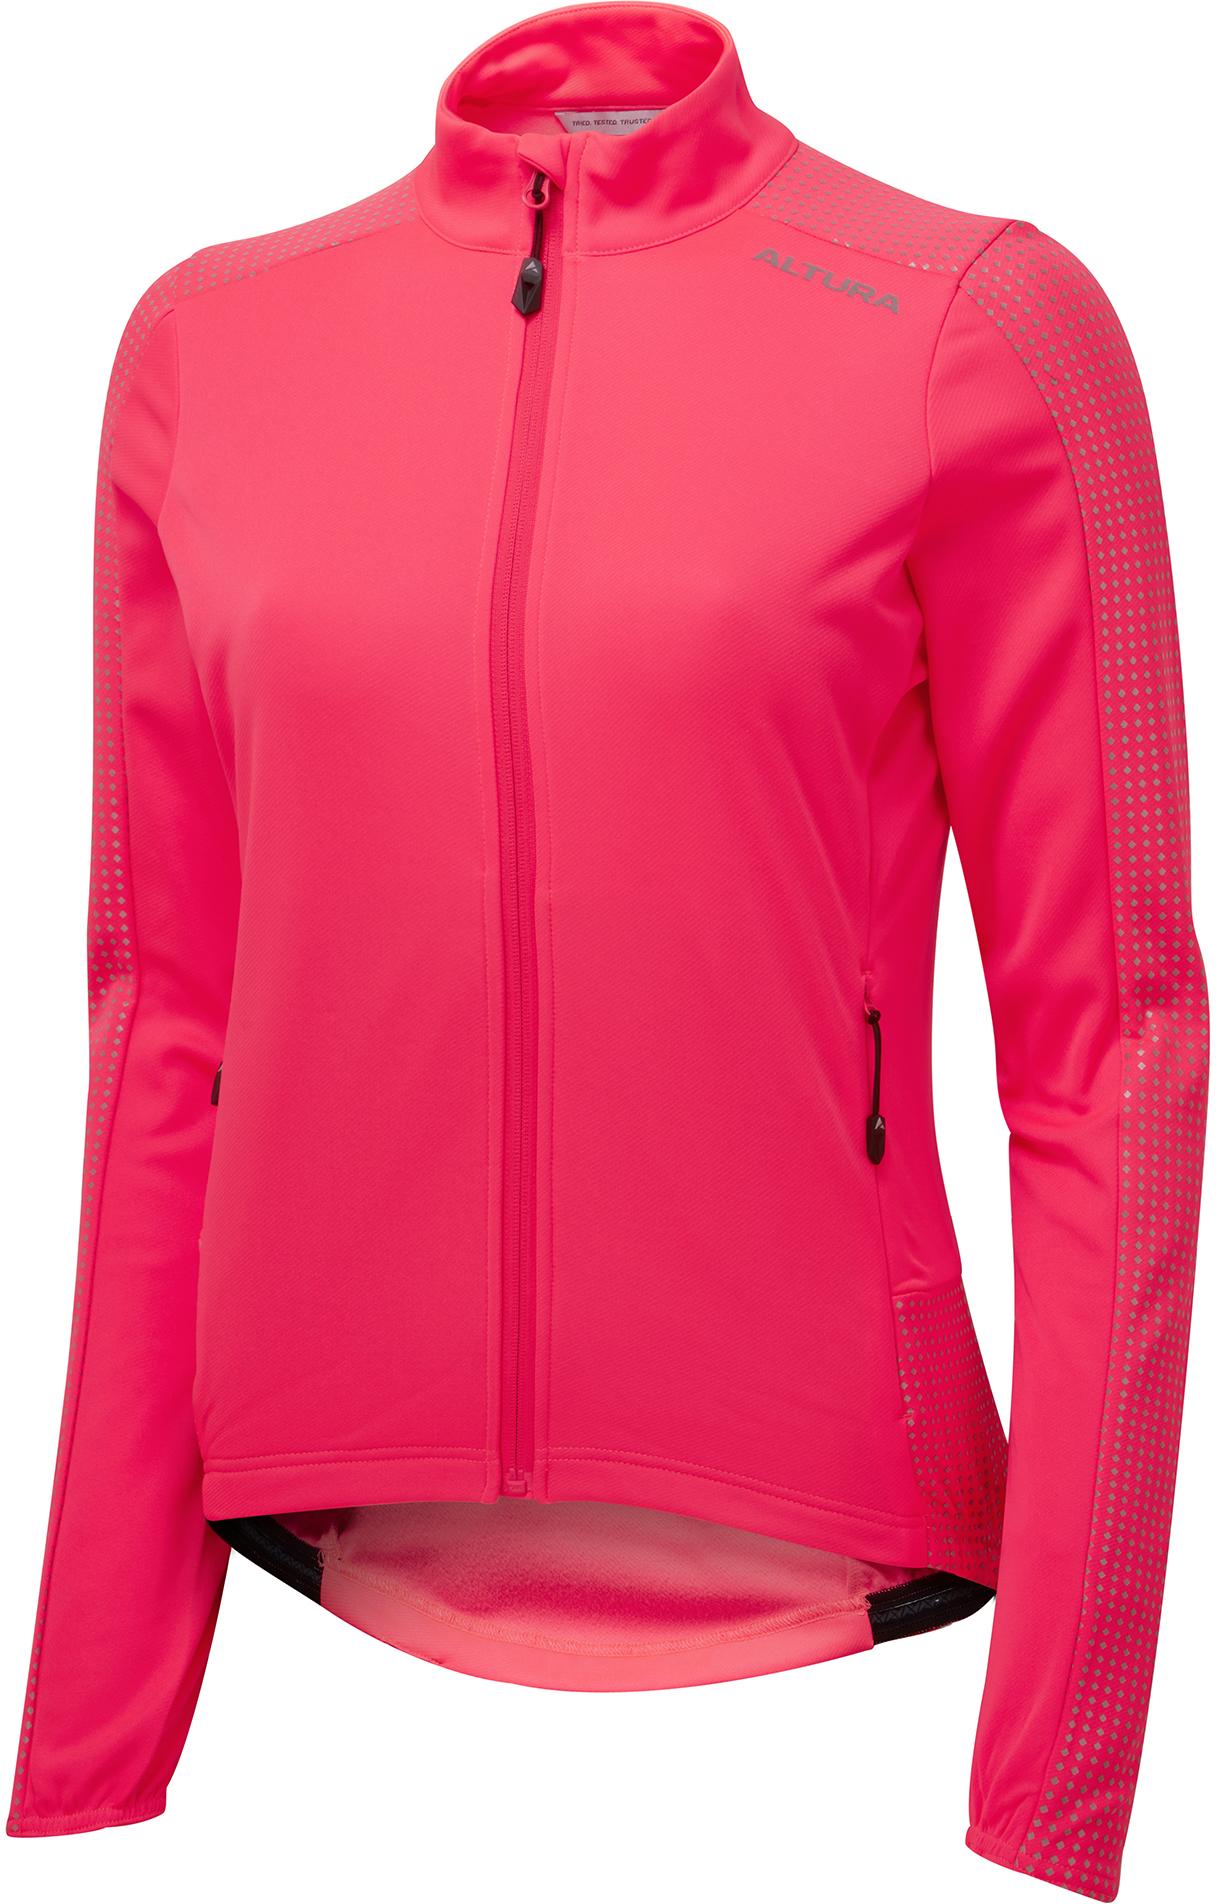 Altura Nightvision Women's Long Sleeve Jersey Pink 8